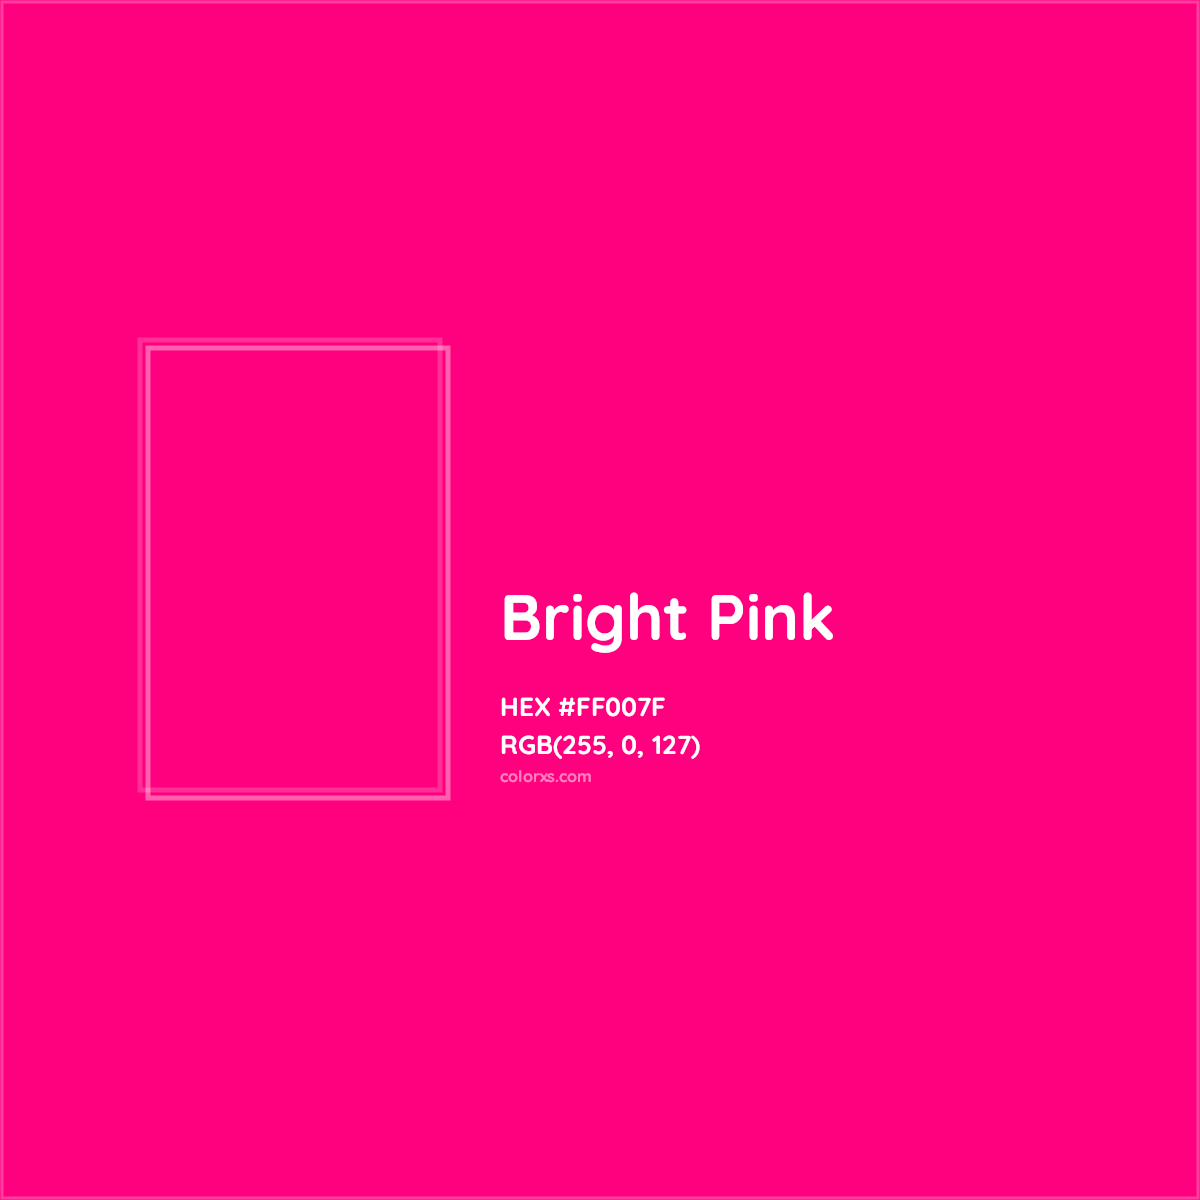 About Bright Pink - Color codes, similar colors and paints